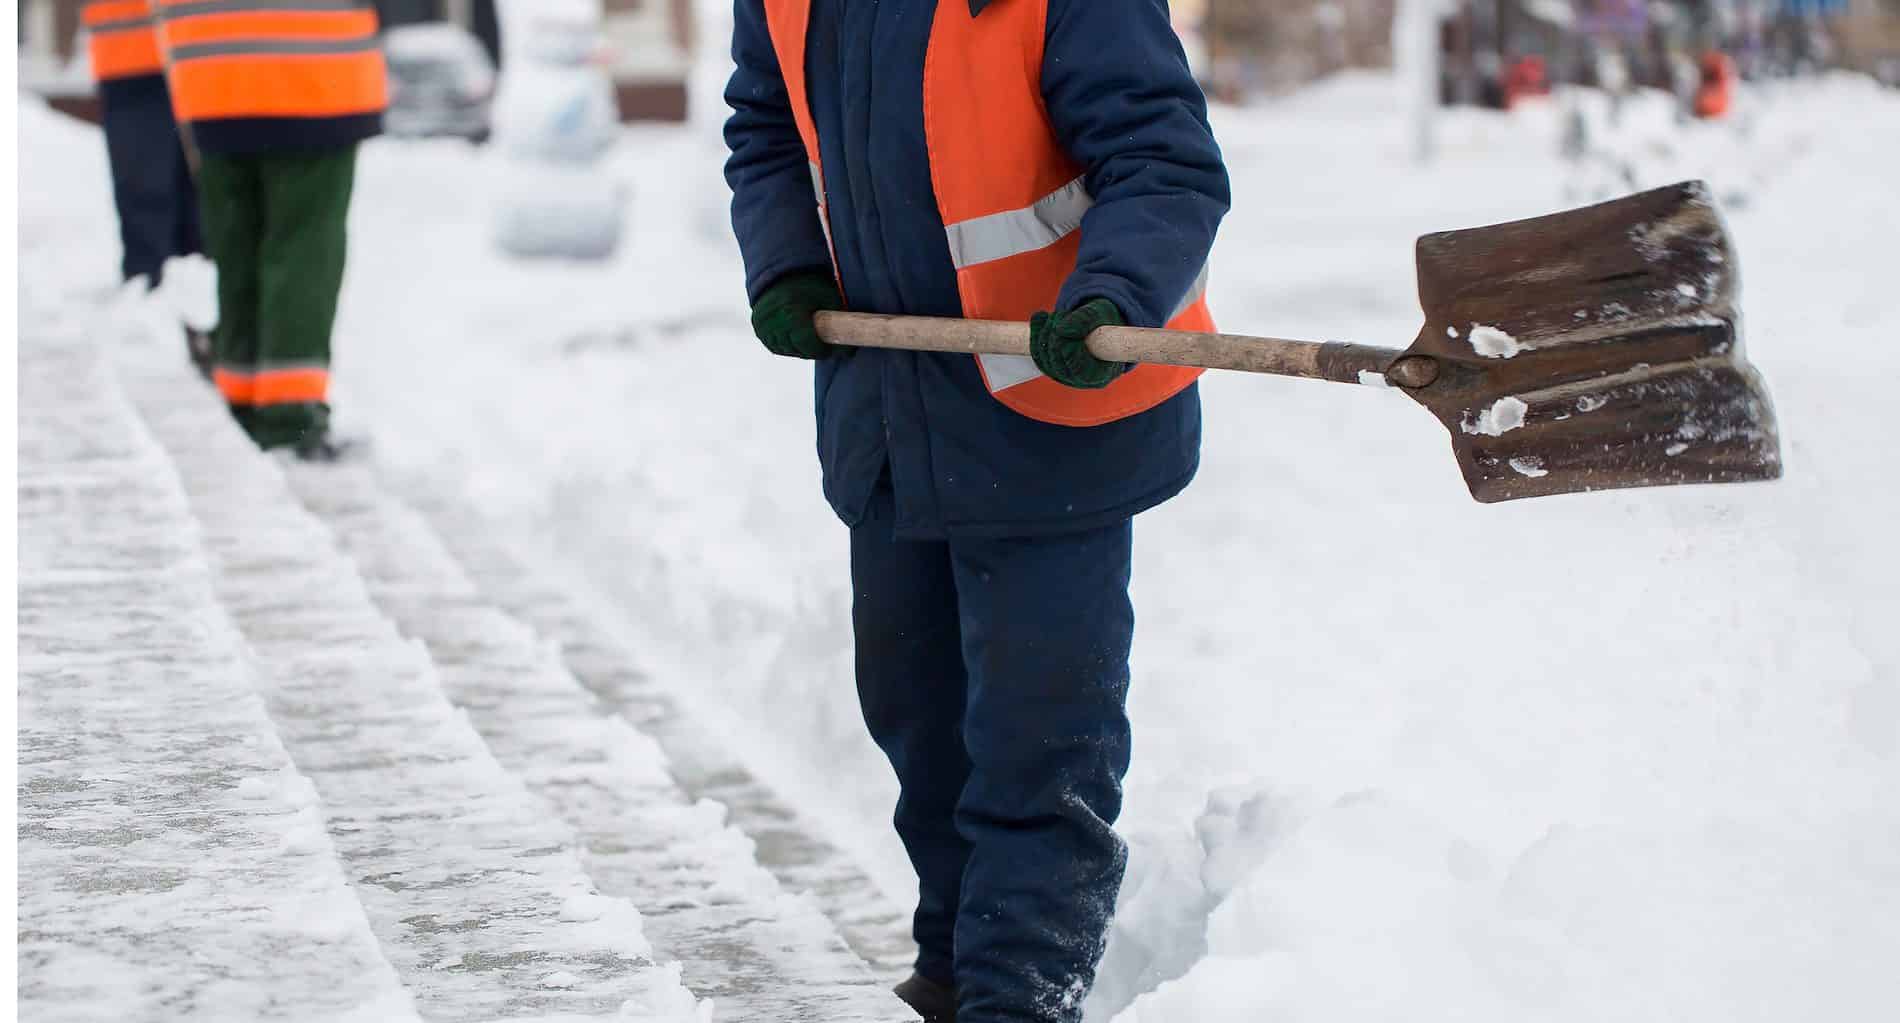 
                     Employees of municipal services in a special form are clearing snow from the sidewalk with a shovel
                     